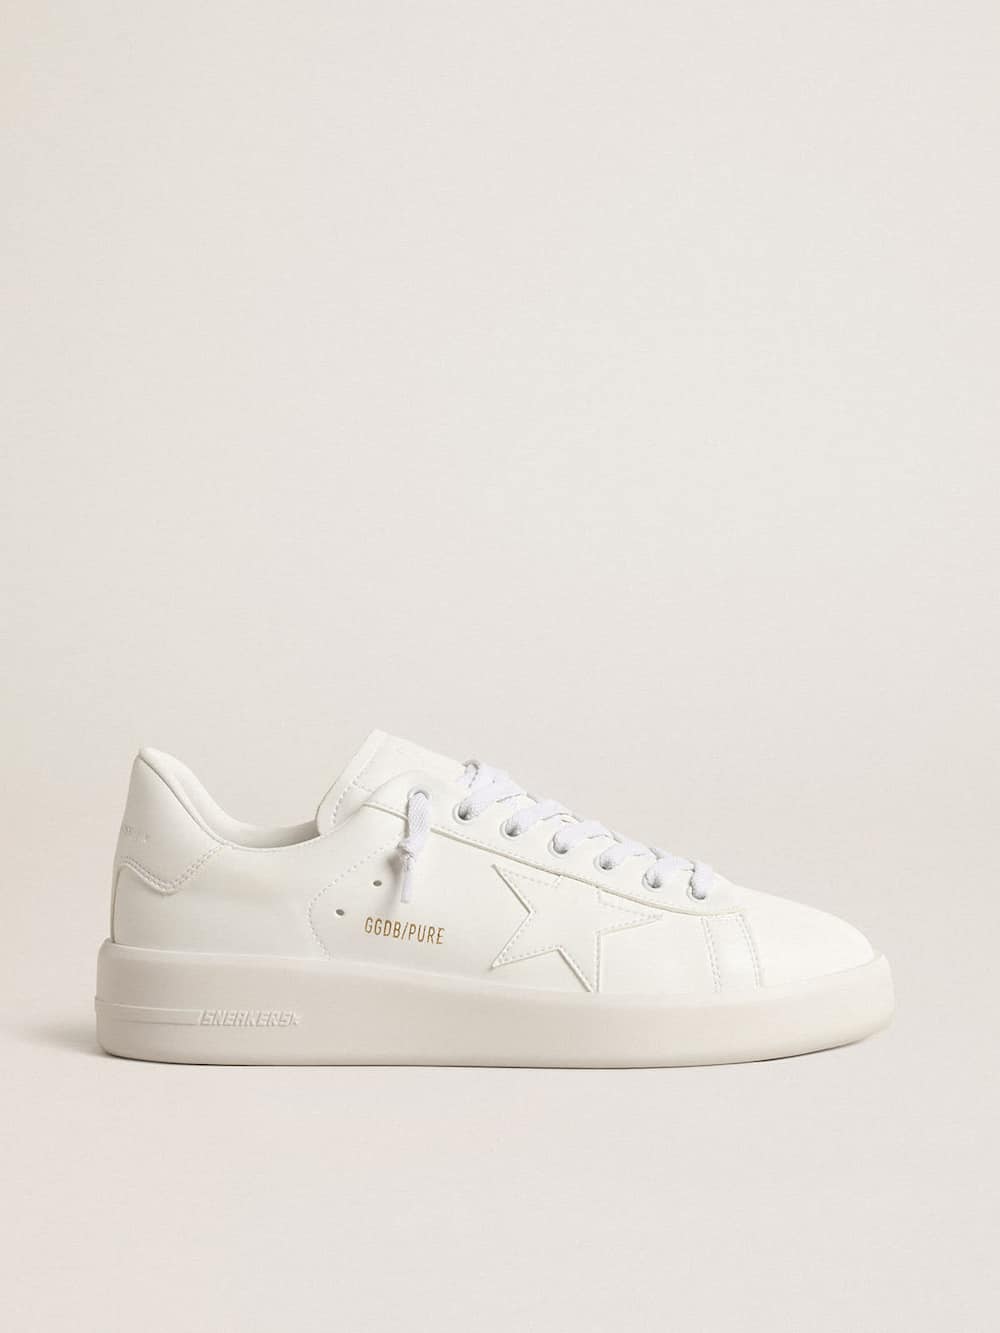 Golden Goose - Women’s bio-based Purestar with white star and heel tab in 